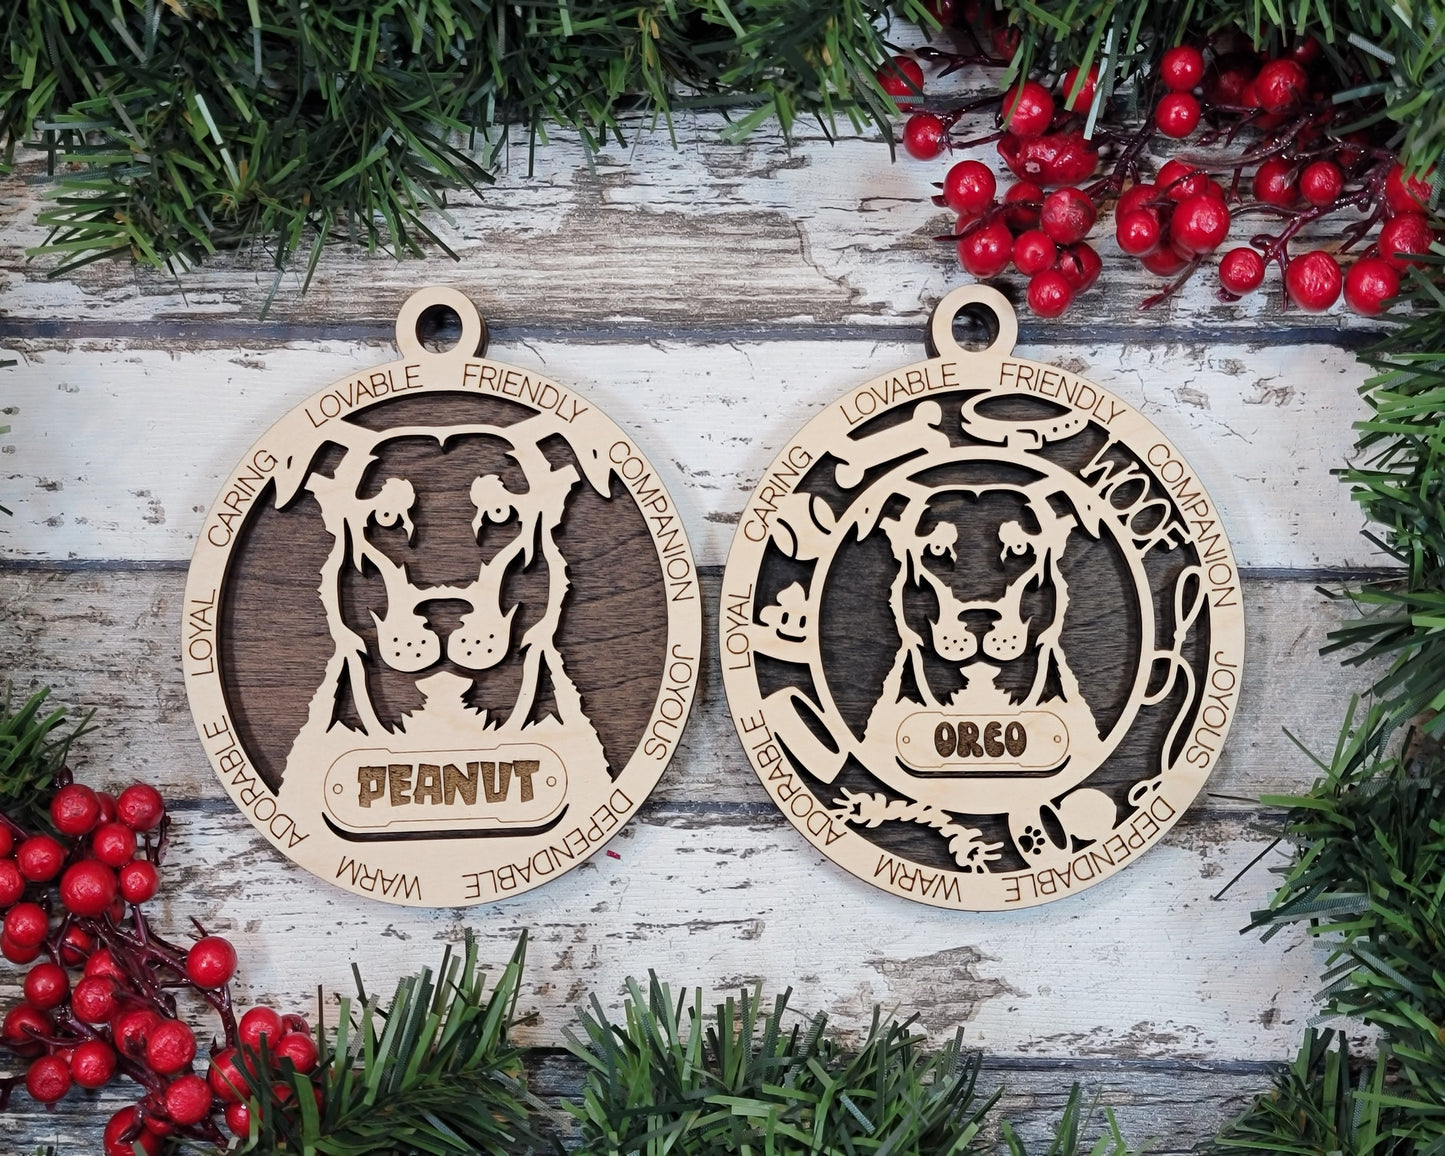 Beauceron - Adorable Dog Ornaments - 4 Ornaments included - SVG, PDF, AI File Download - Sized for Glowforge